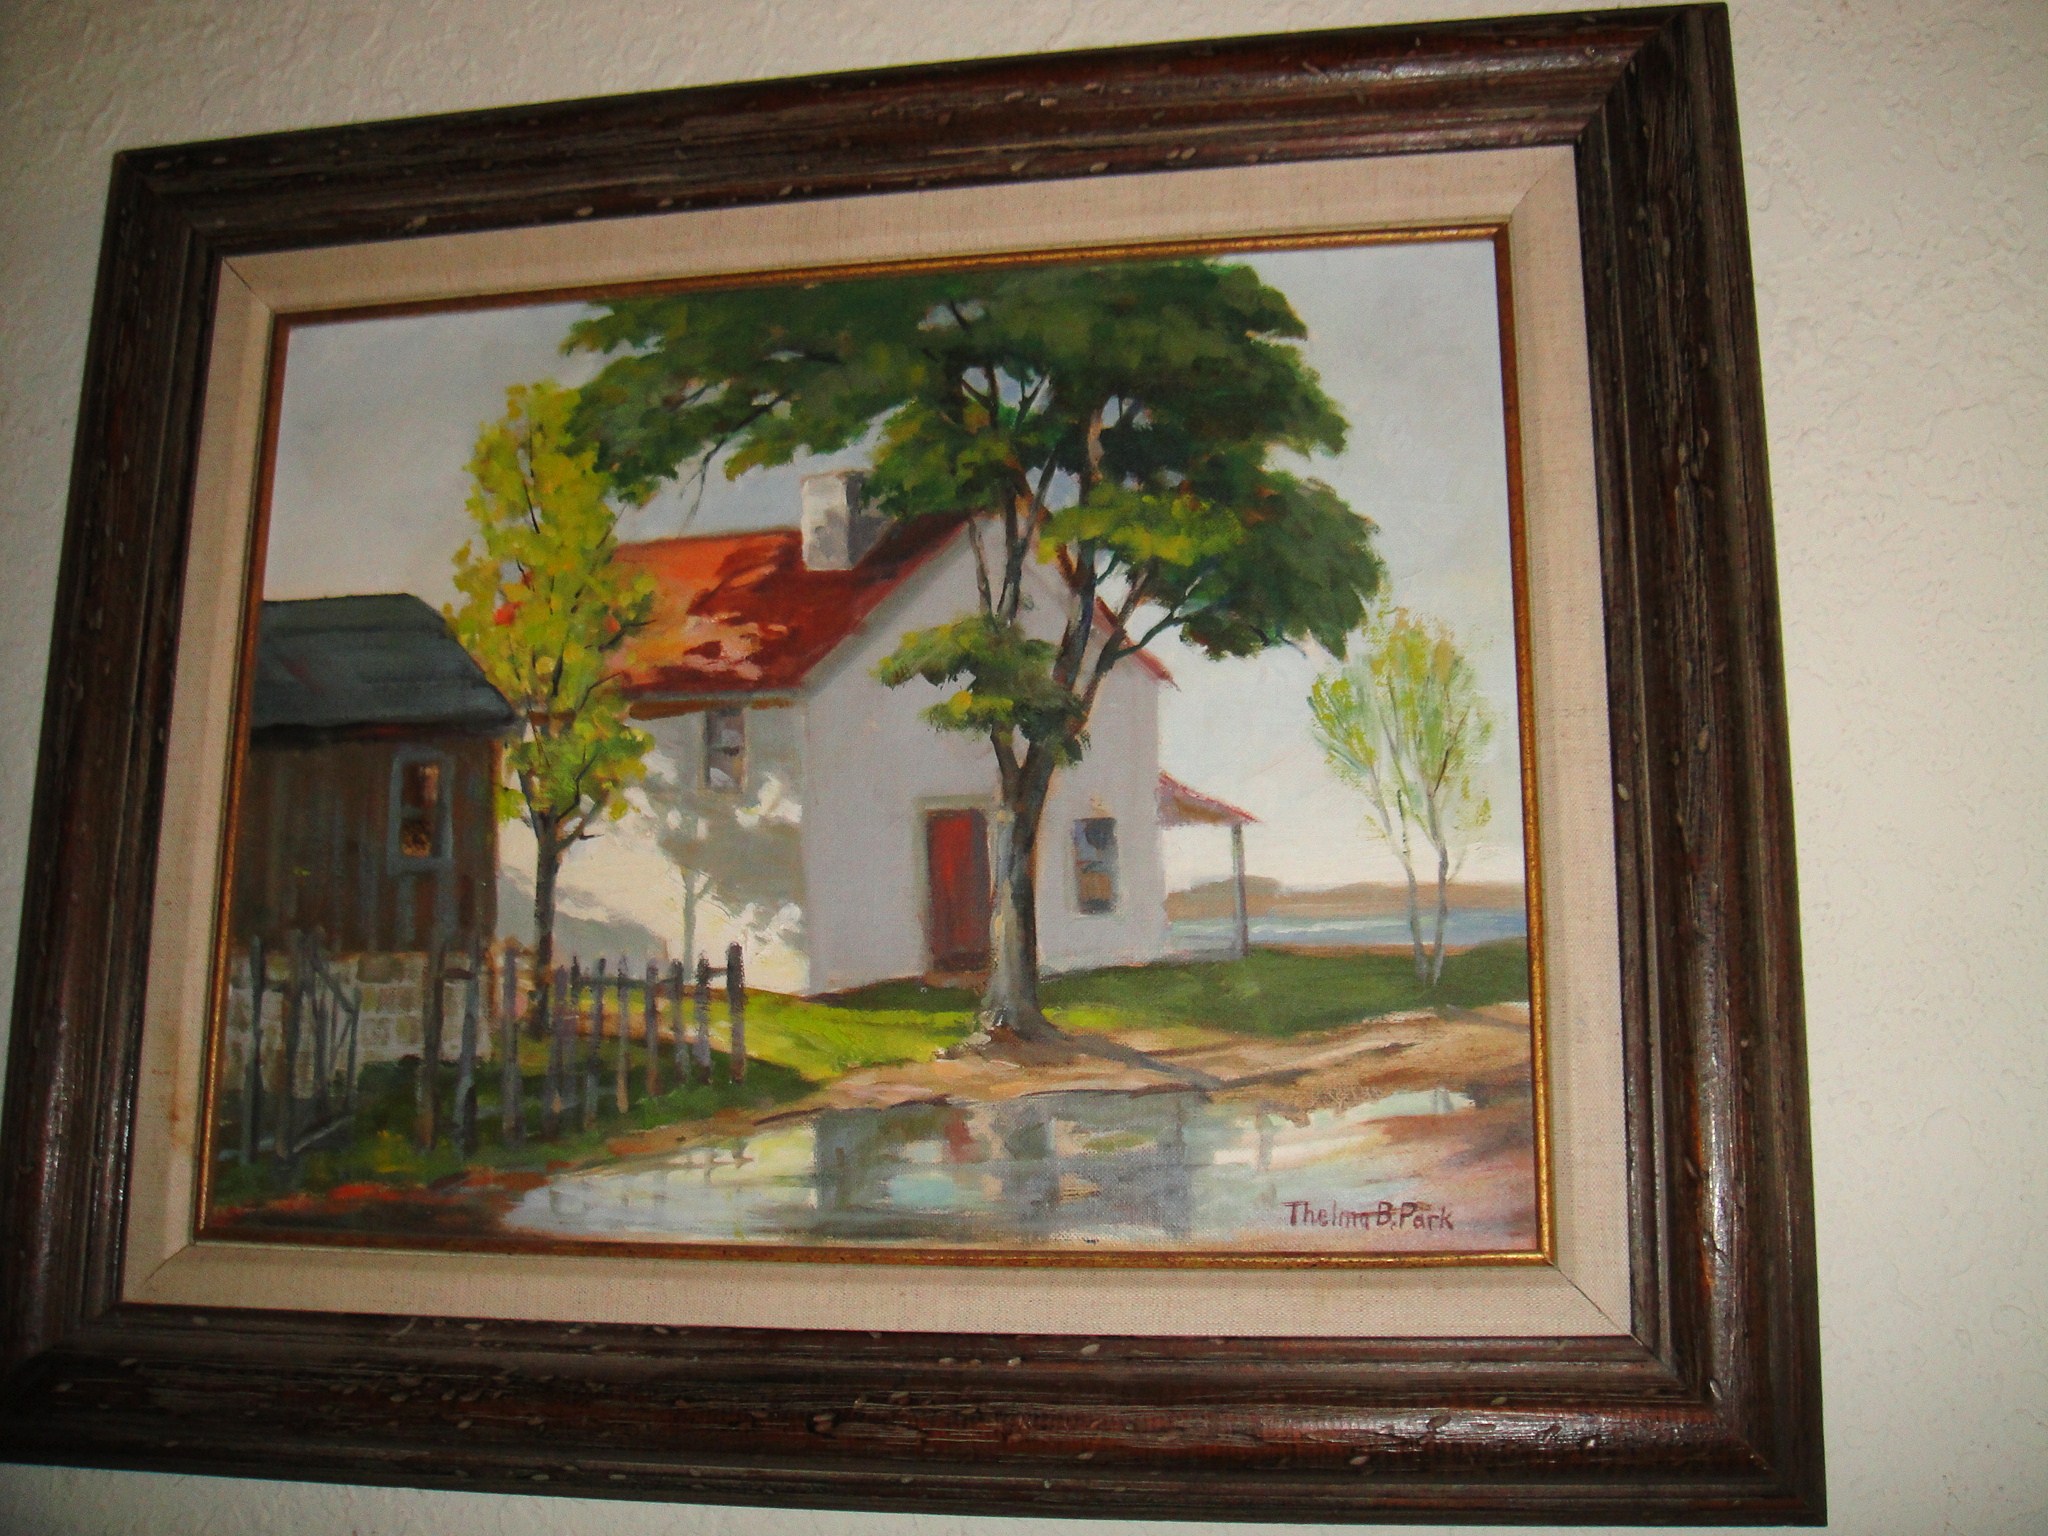 Thelma B. Parks, Fort Worth Circle, Artist Paintings Antiques Fort worth